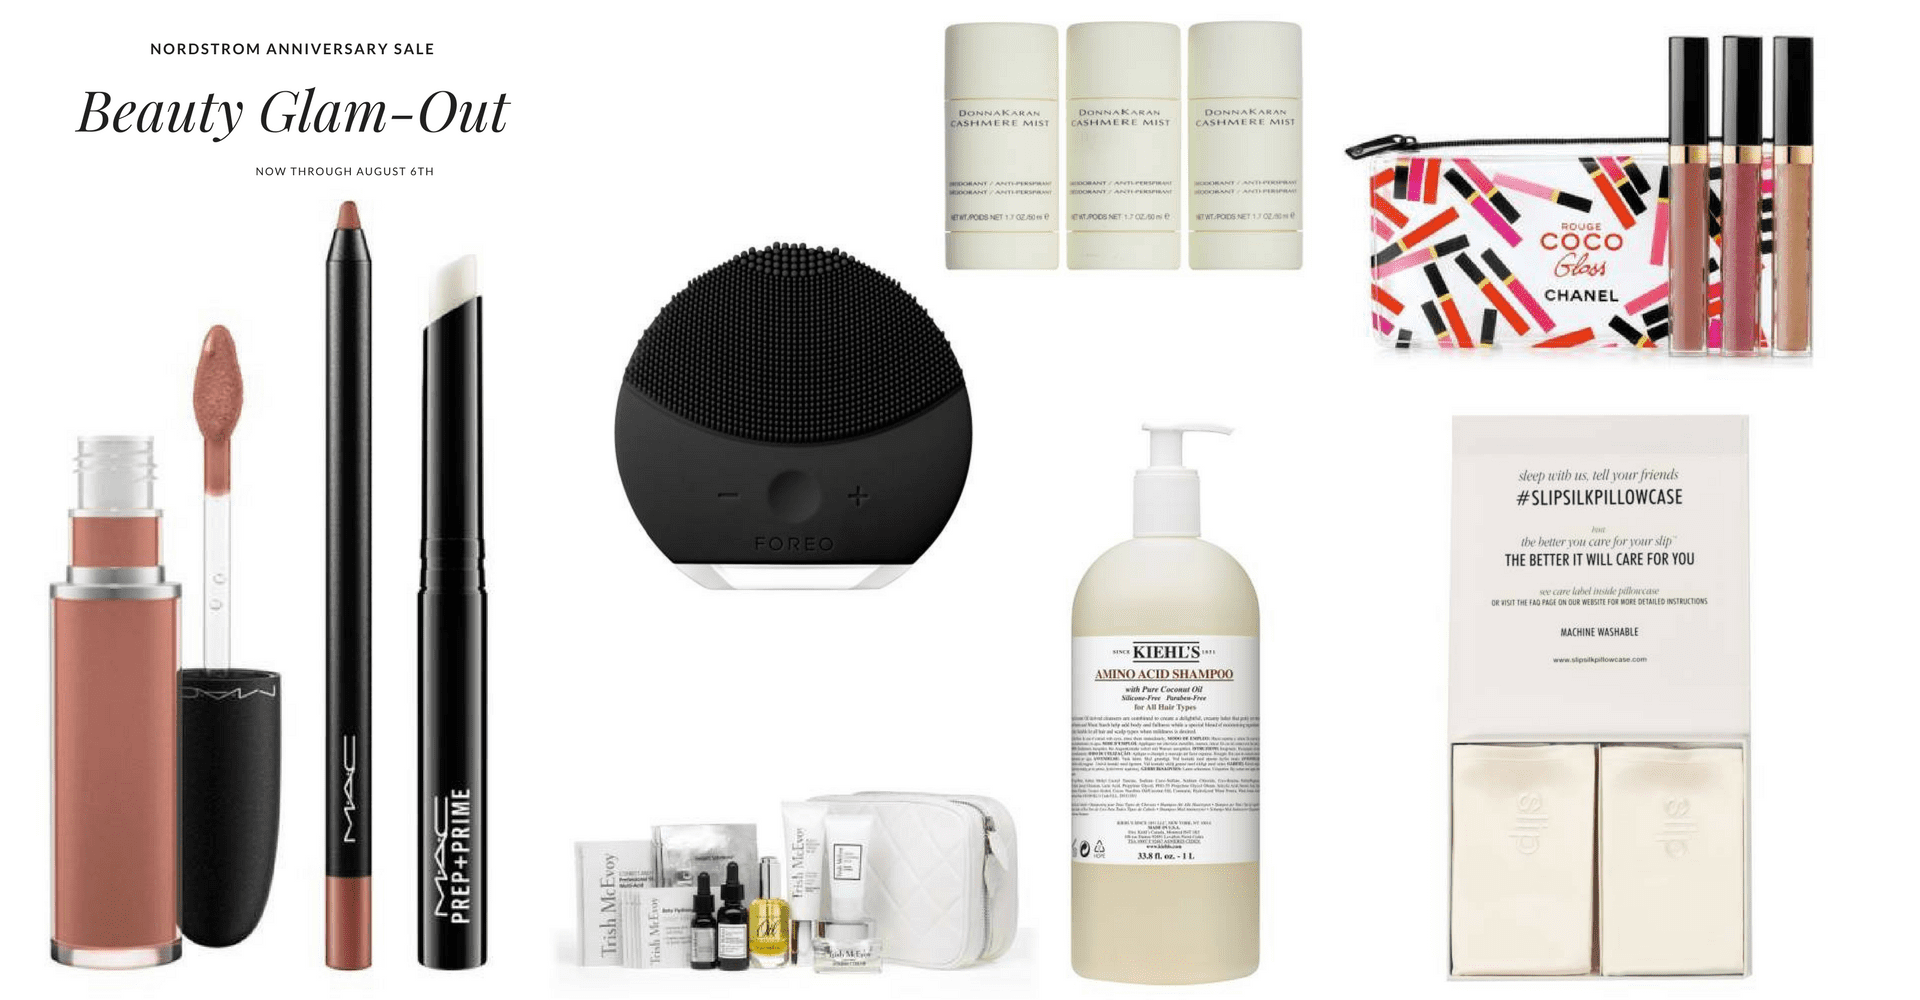 Who's Got the Best Gifts? Our Nordstrom Anniversary Sale Beauty Picks!